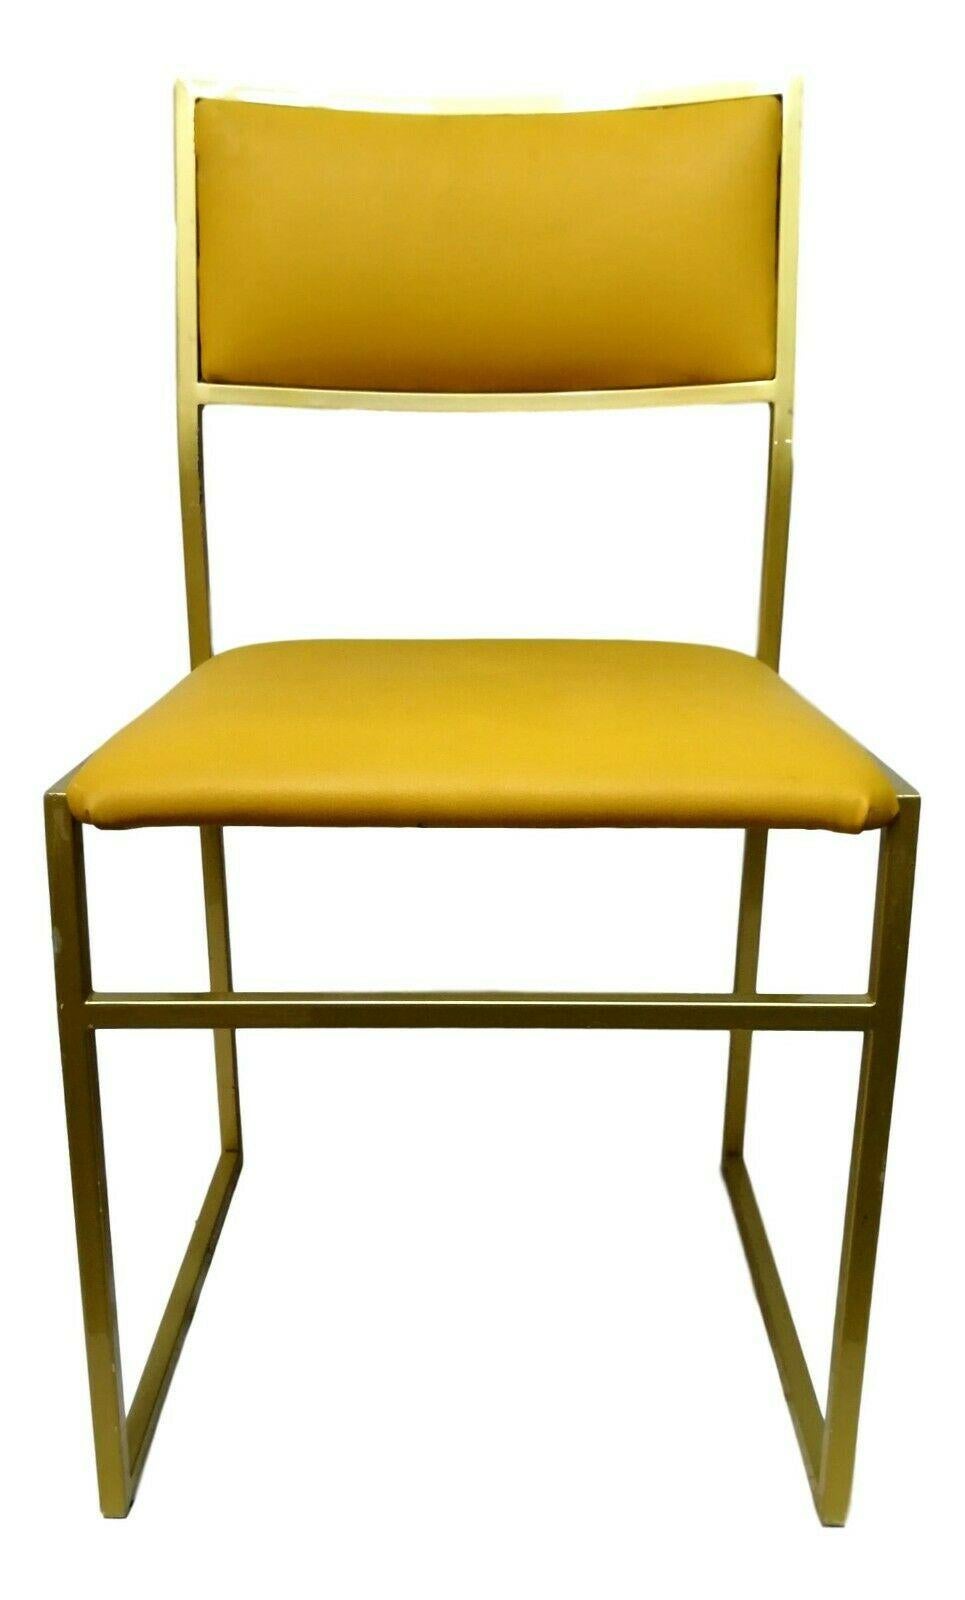 Lot of Six Collectible Coloured Chairs in Gold Metal, 1970s For Sale 8